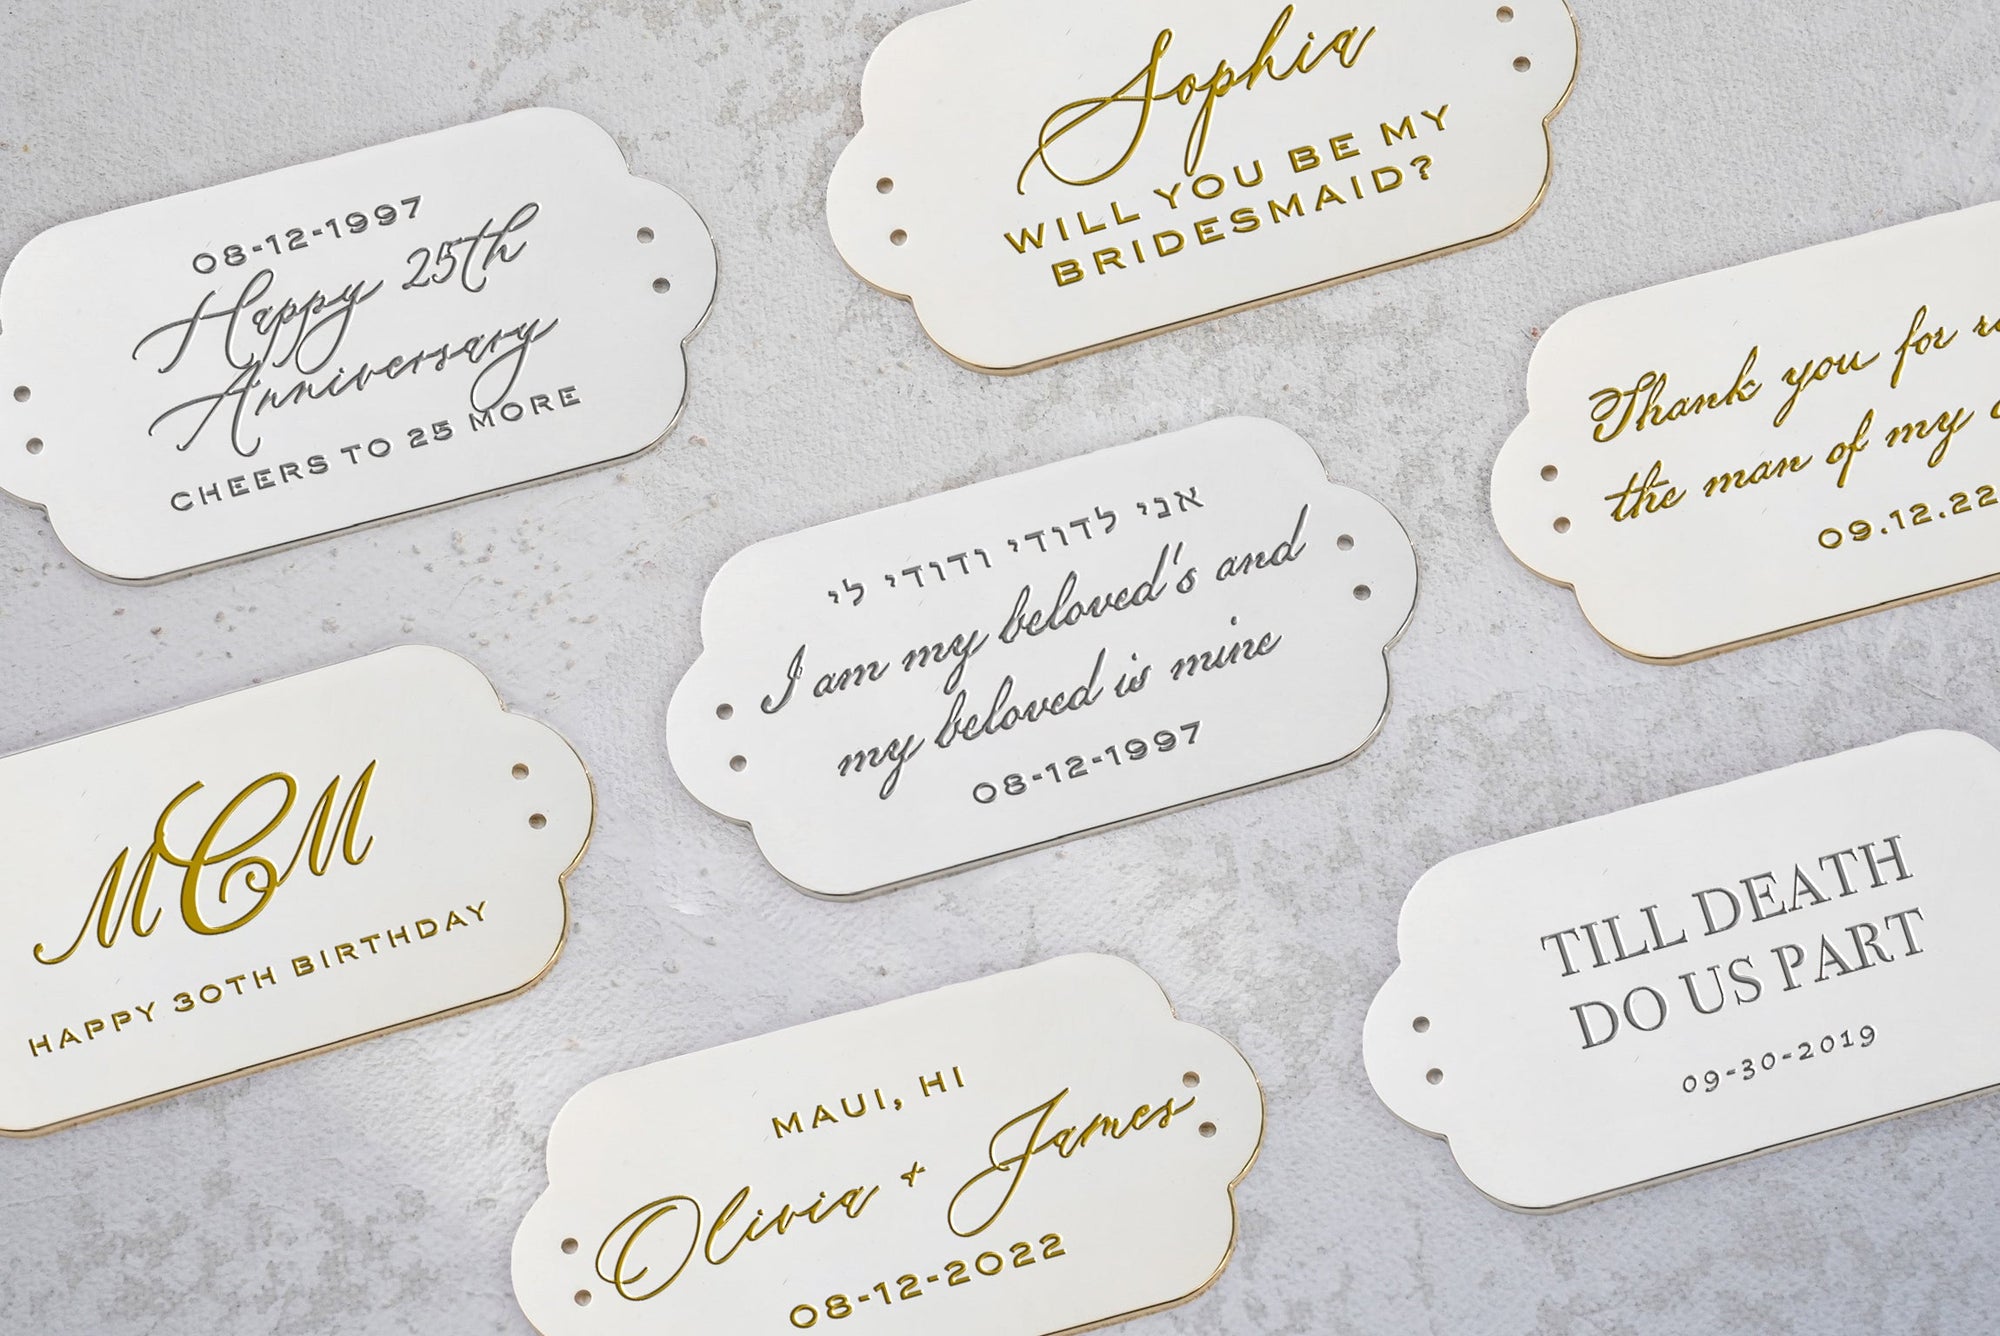 The Bella Rosa Collection&#39;s Elegant Bella Fiori Clutch Ivory Clutch Petite in white and gold calligraphy cards for various occasions, including weddings and anniversaries, displayed on a Duchess Satin background.